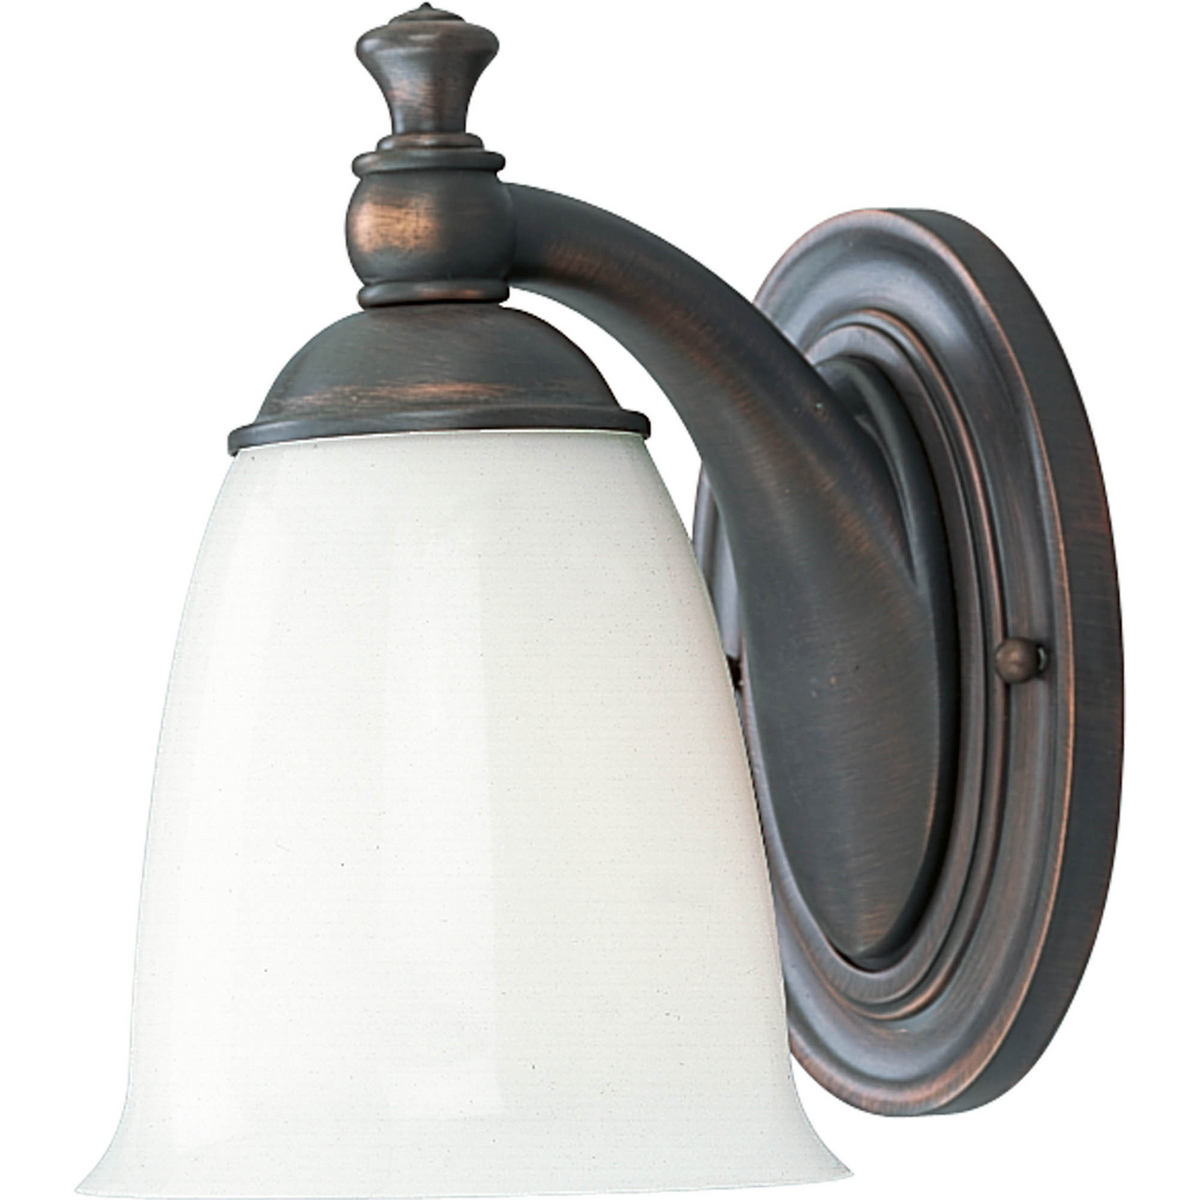 Feeling nostalgic for simpler times, The Victorian Collection helps you create a vintage look in any room. This Venetian Bronze one-light bath fixture is boldly simple with pure white, triplex opal glass shades and precise metal fittings. Coordinates with Delta Faucet fixtures to provide a whole-room decorating solution. This fixture can be installed with the glass facing up or down to suit your preference.